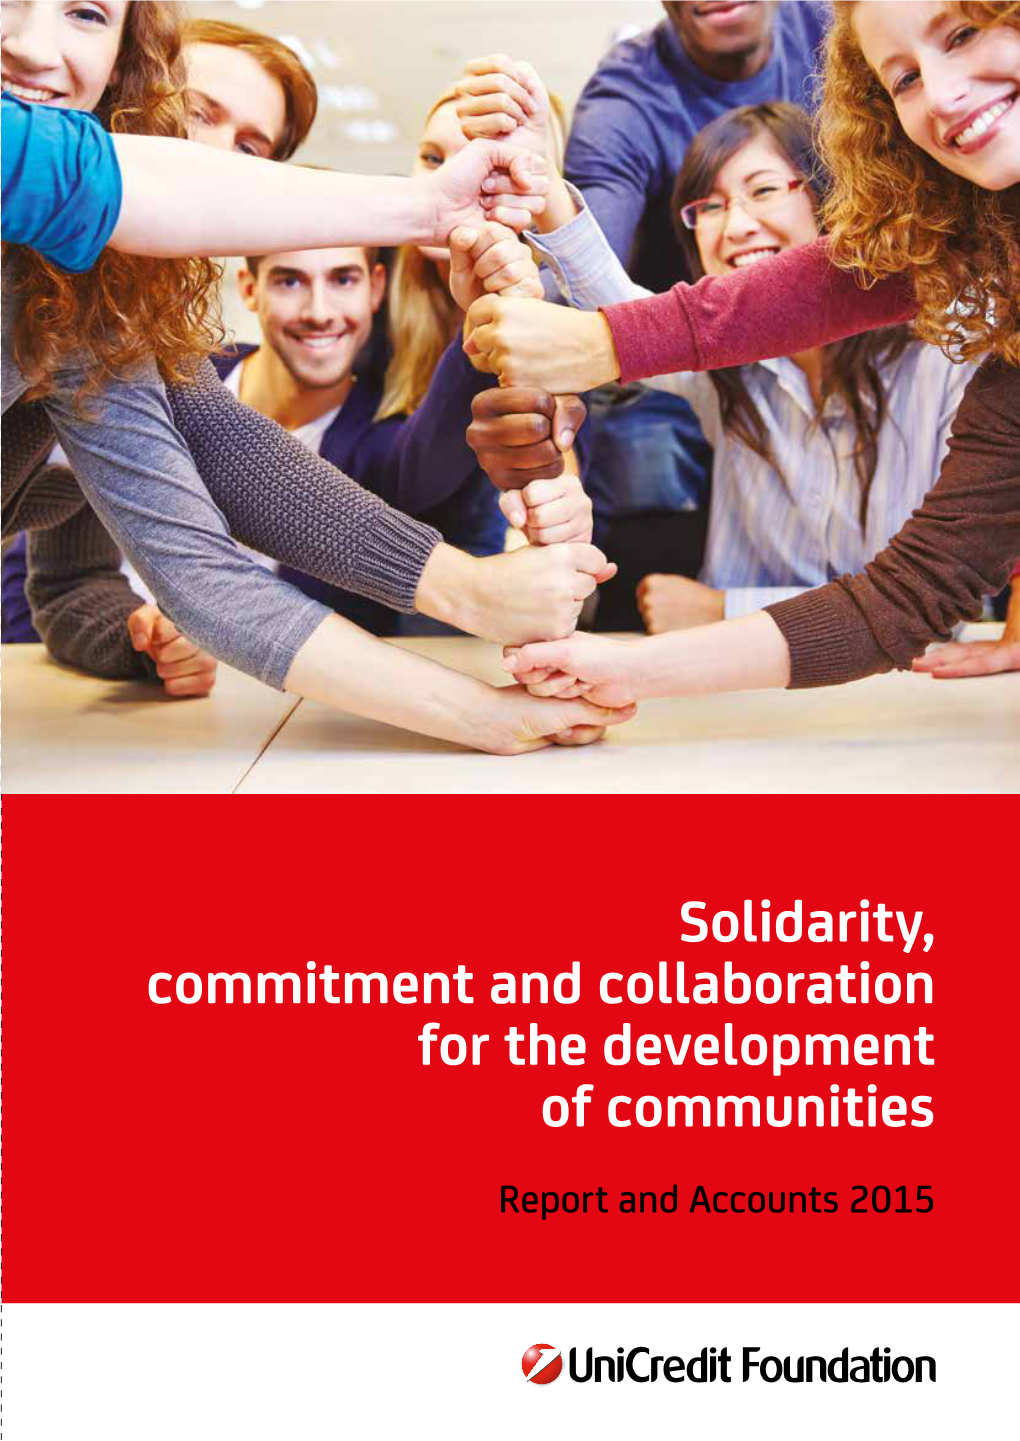 Solidarity, Commitment and Collaboration for the Development of Communities Report and Accounts 2015